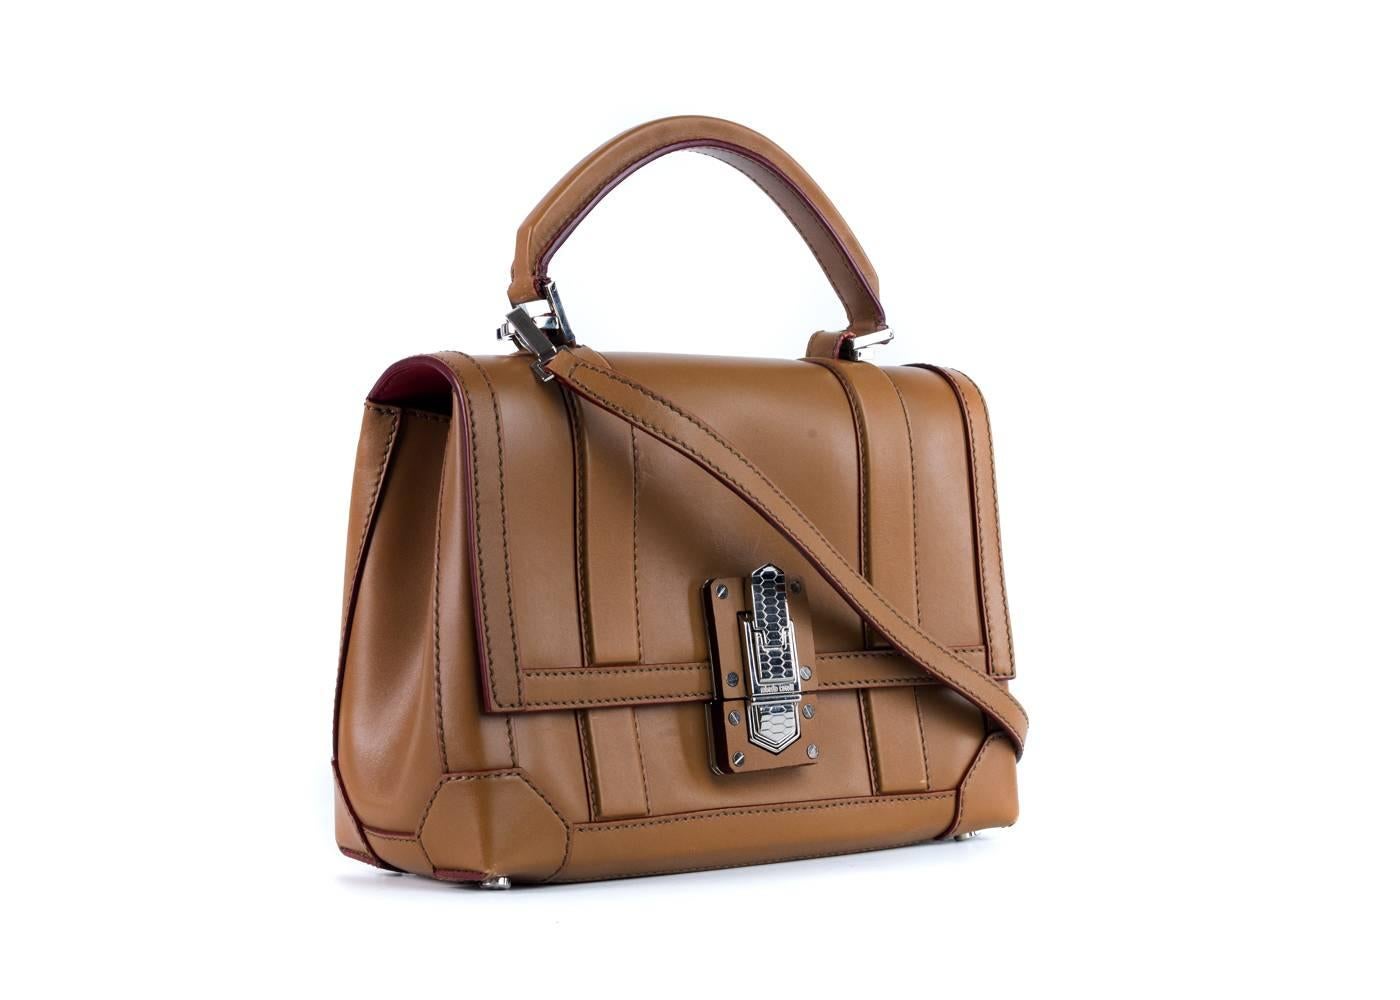 Brand New Roberto Cavalli Satchel Bag
Original Tags Included
Retails in Stores & Online for $1660
Dimensions: 10